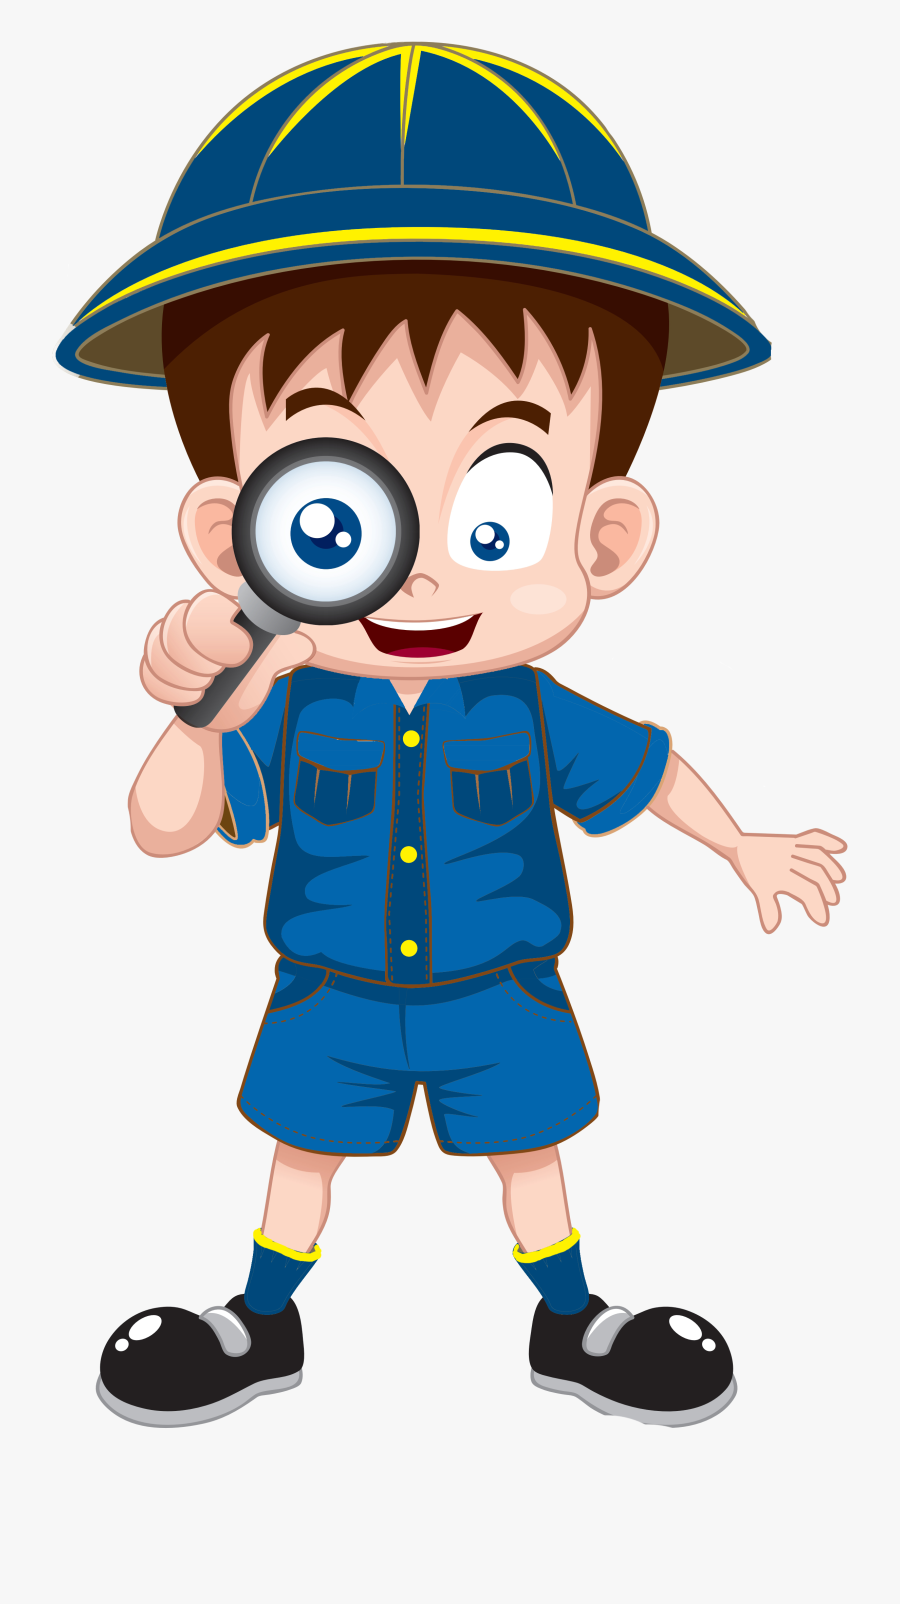 Scouting For Boys Boy Scouts Of America Cub Scout Camping - Boy Scout Cartoon Transparent, Transparent Clipart